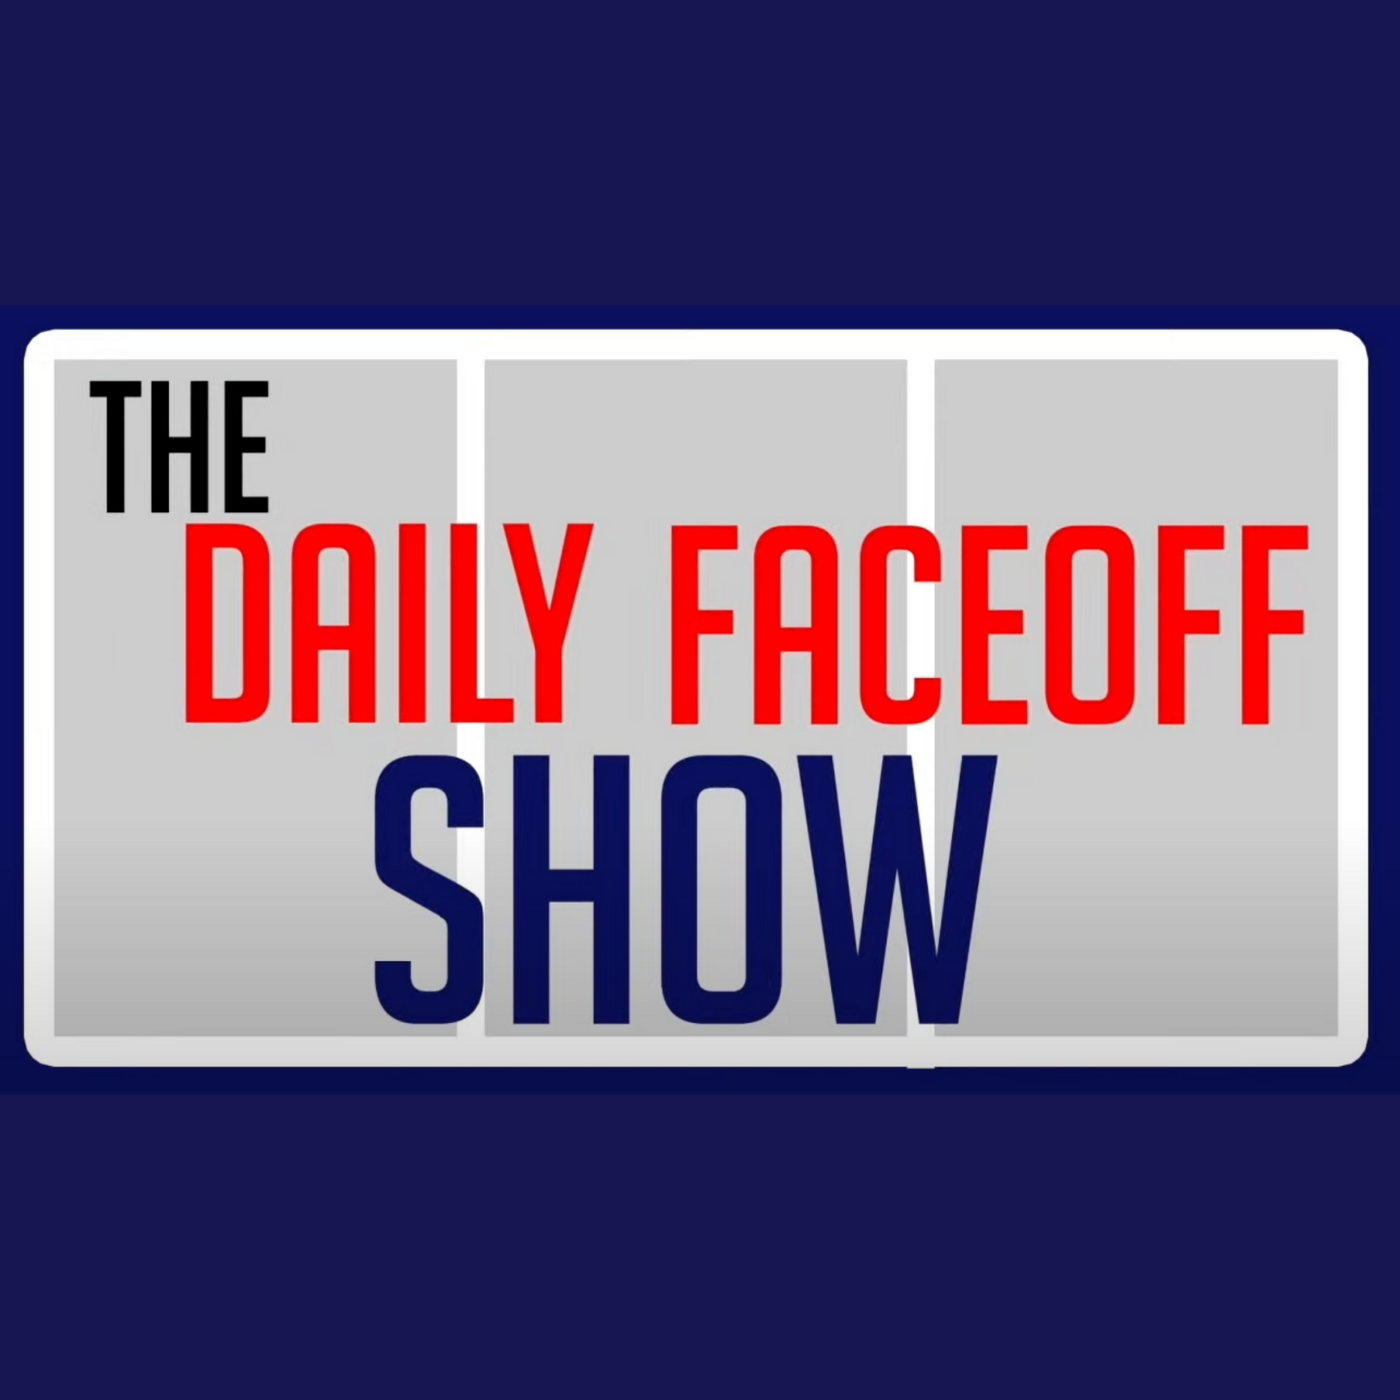 June 13th - The Daily Faceoff Show - Feat. Tyler Yaremchuk & Chris Gear